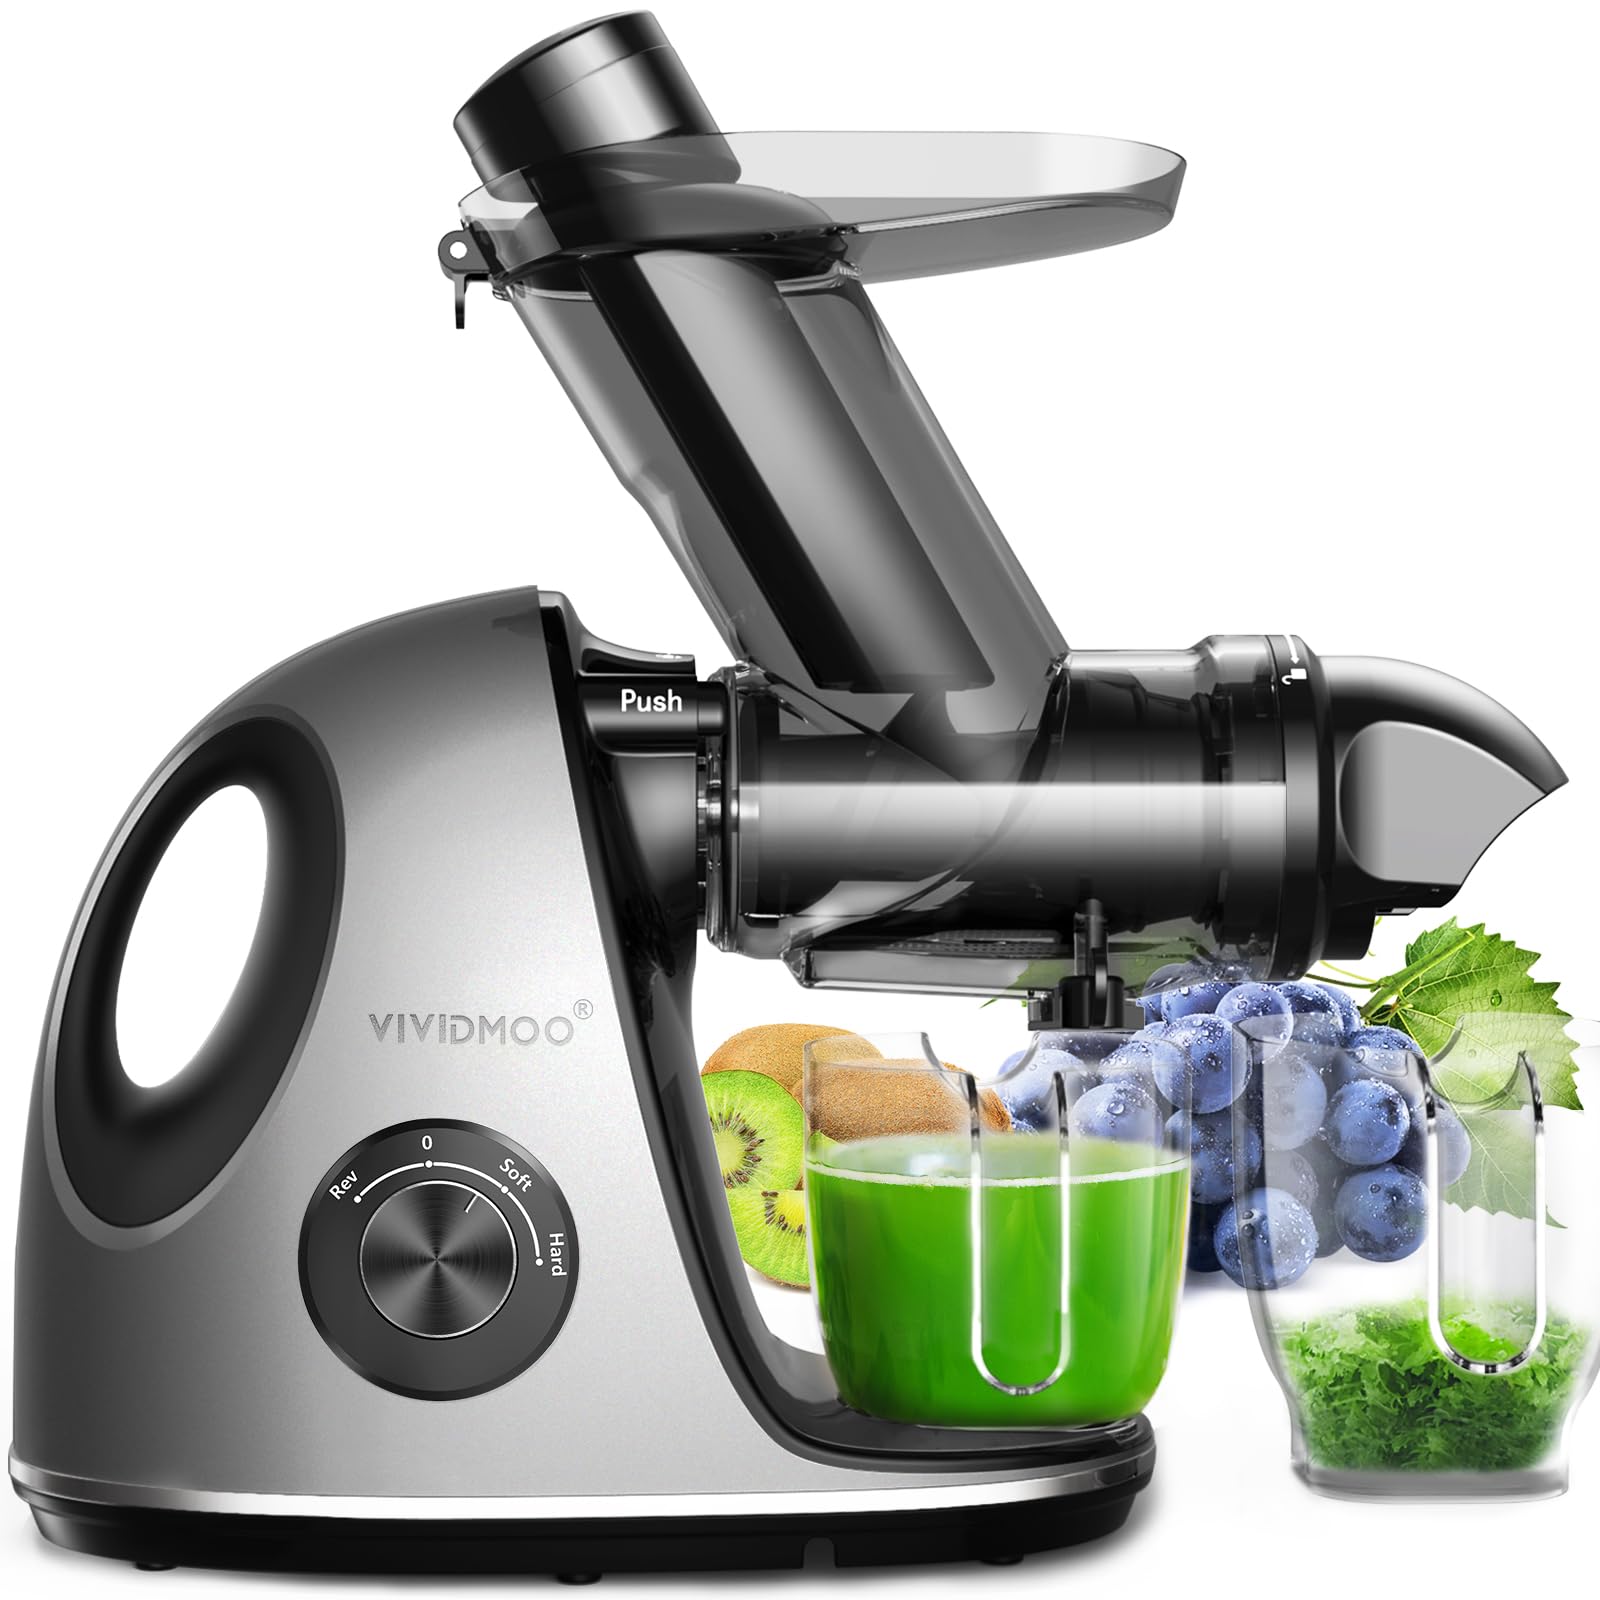 Vividmoo Juicer Machines, cold Press Juicer Machines 3 inches Wide chute, Vividmoo Slow Masticating Juicer, celery Juicers with Reverse F